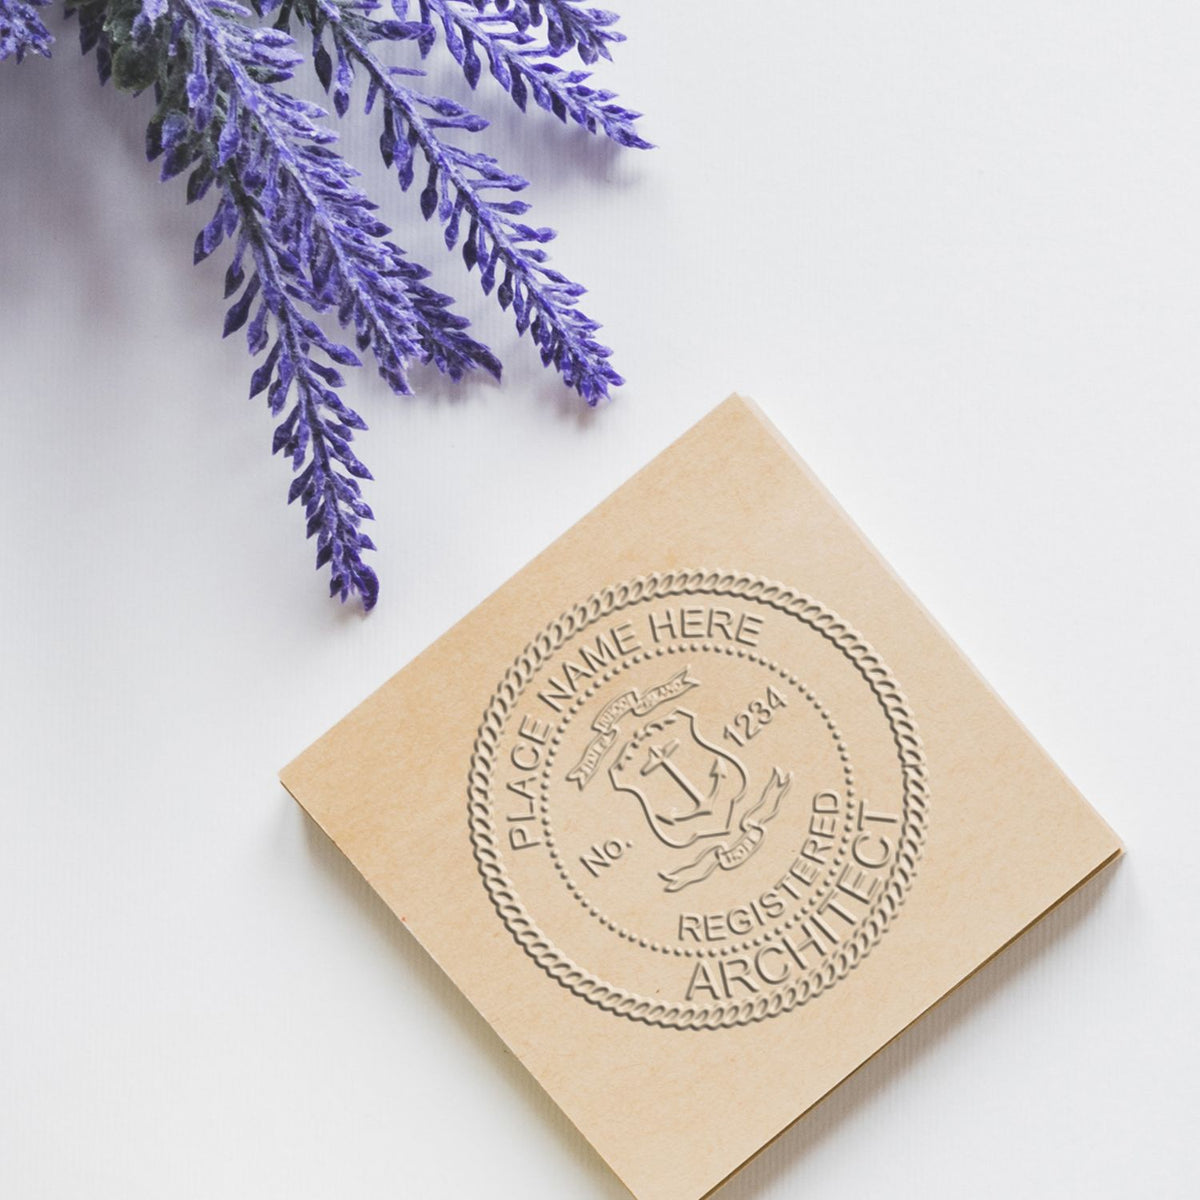 The Rhode Island Desk Architect Embossing Seal stamp impression comes to life with a crisp, detailed photo on paper - showcasing true professional quality.